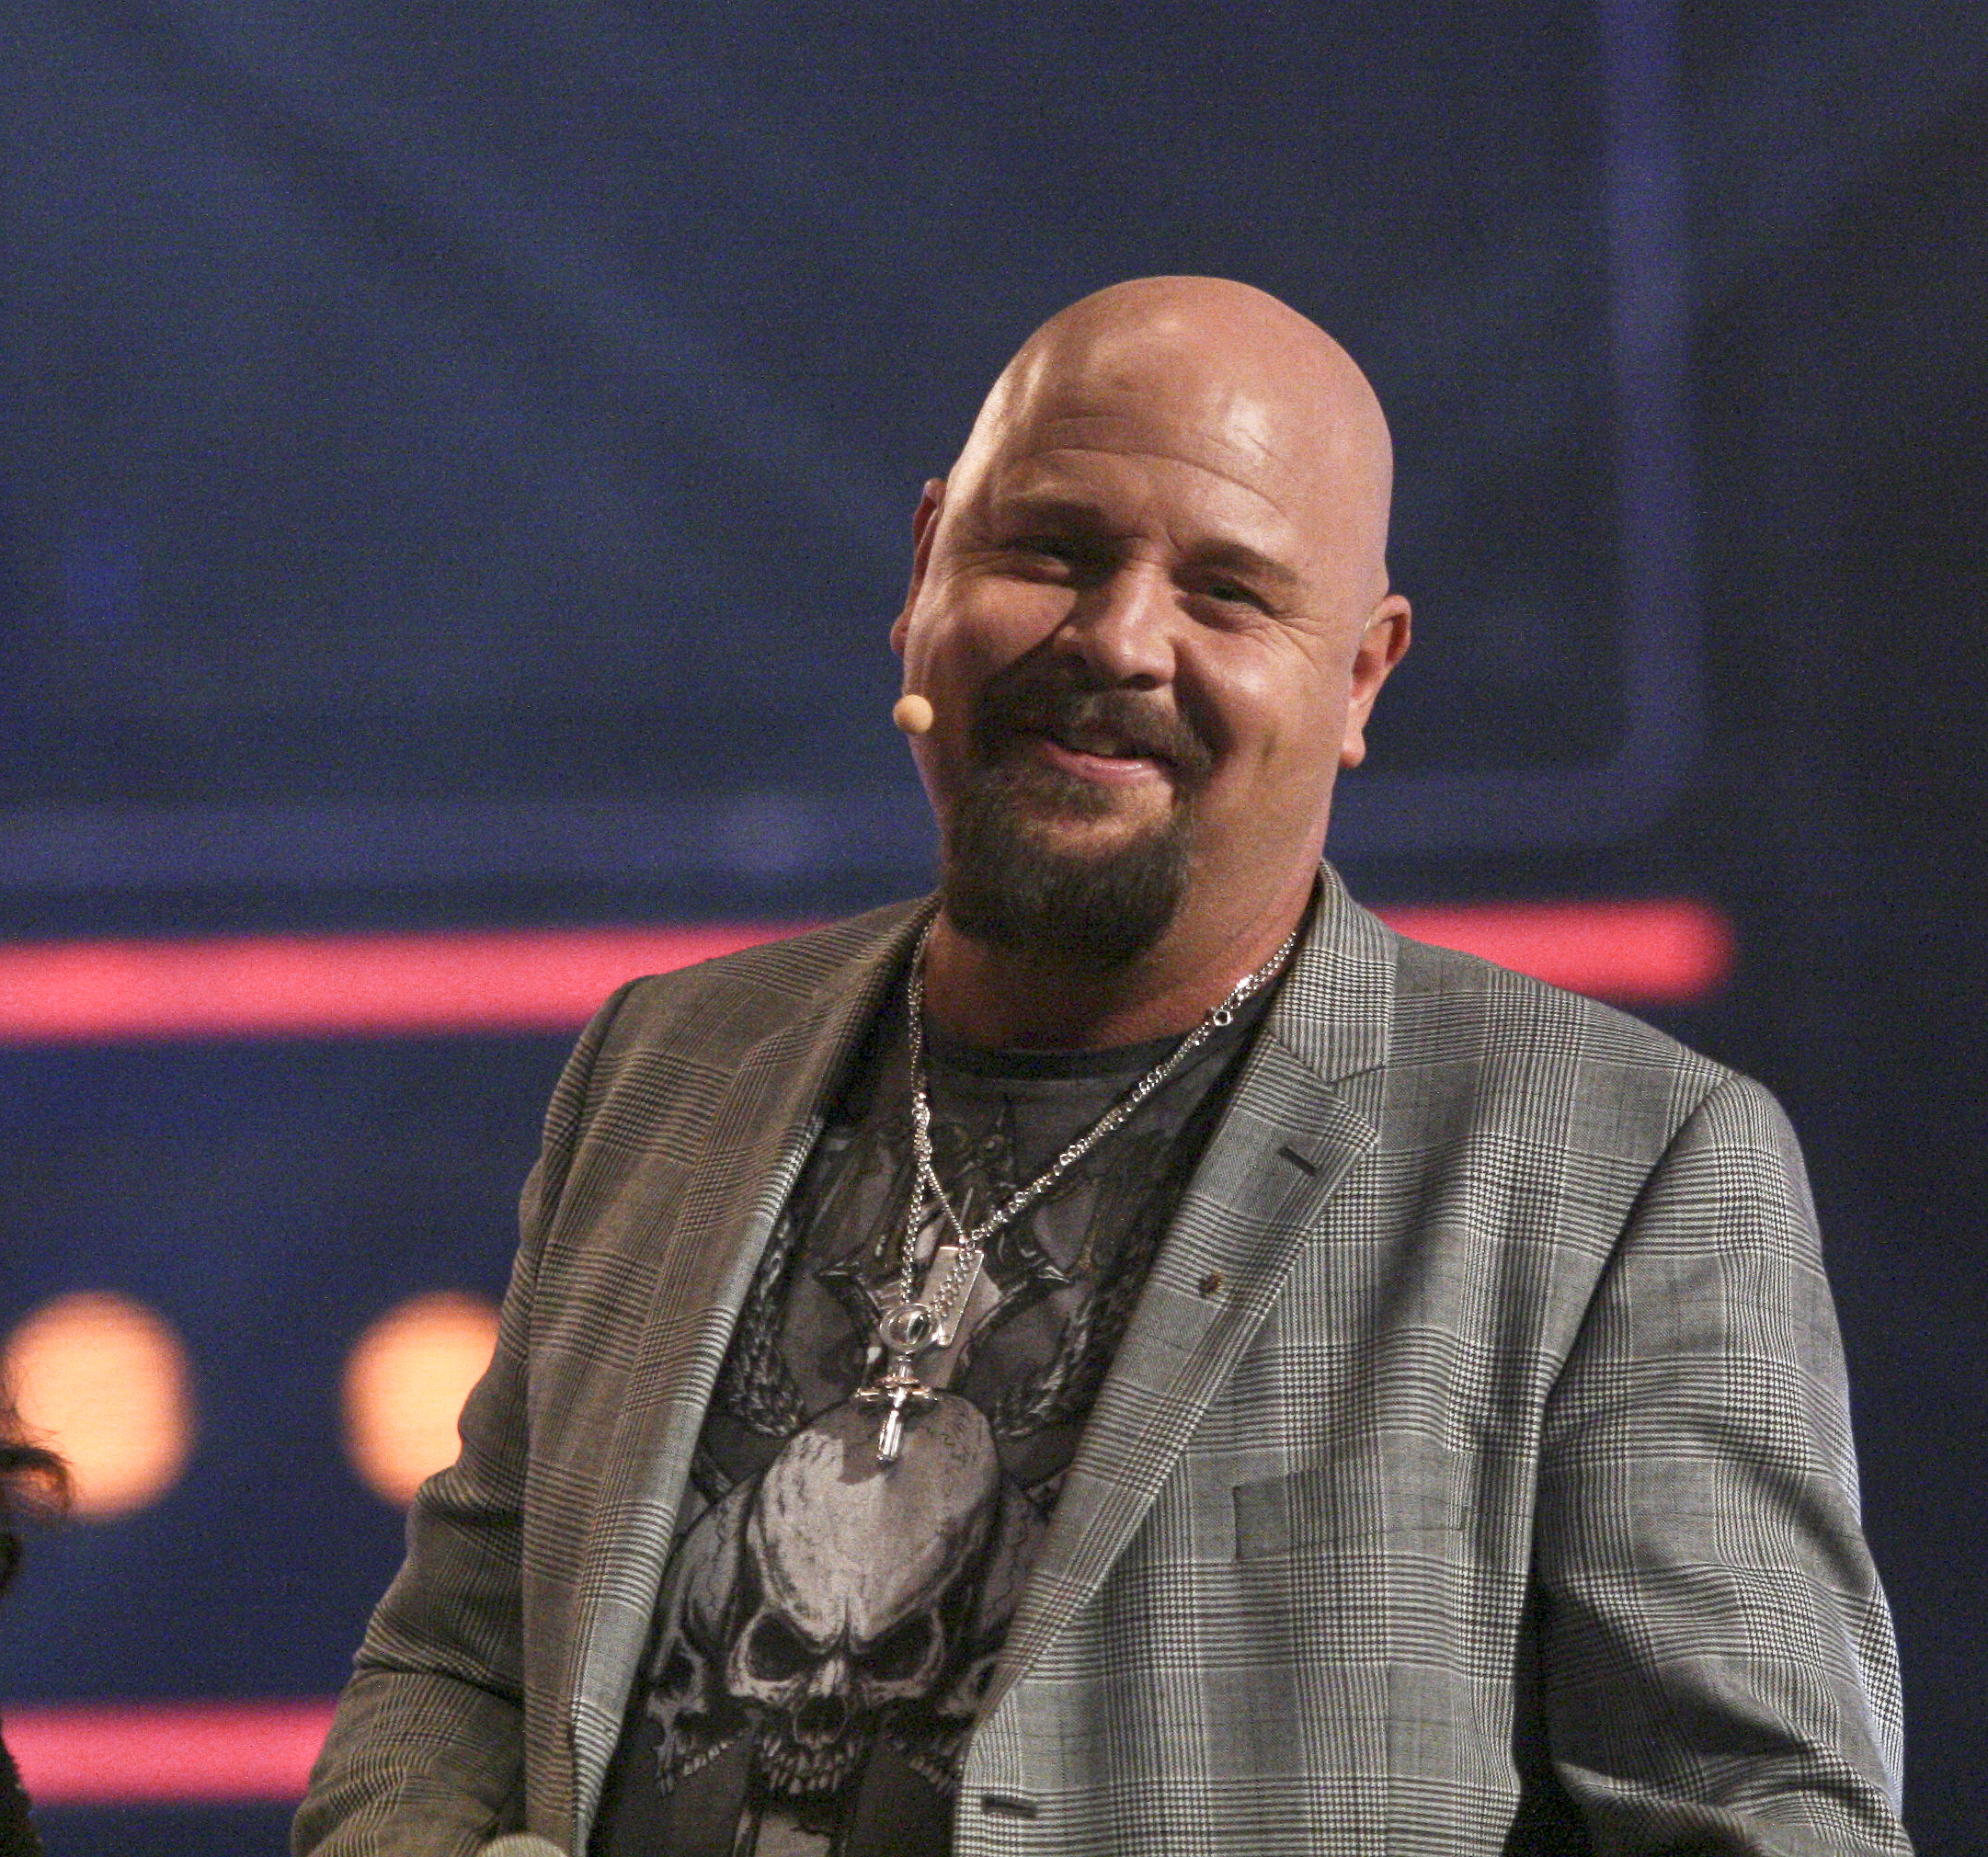 Eurovision Song Contest, Norge, Azerbajdzjan, Anders Bagge